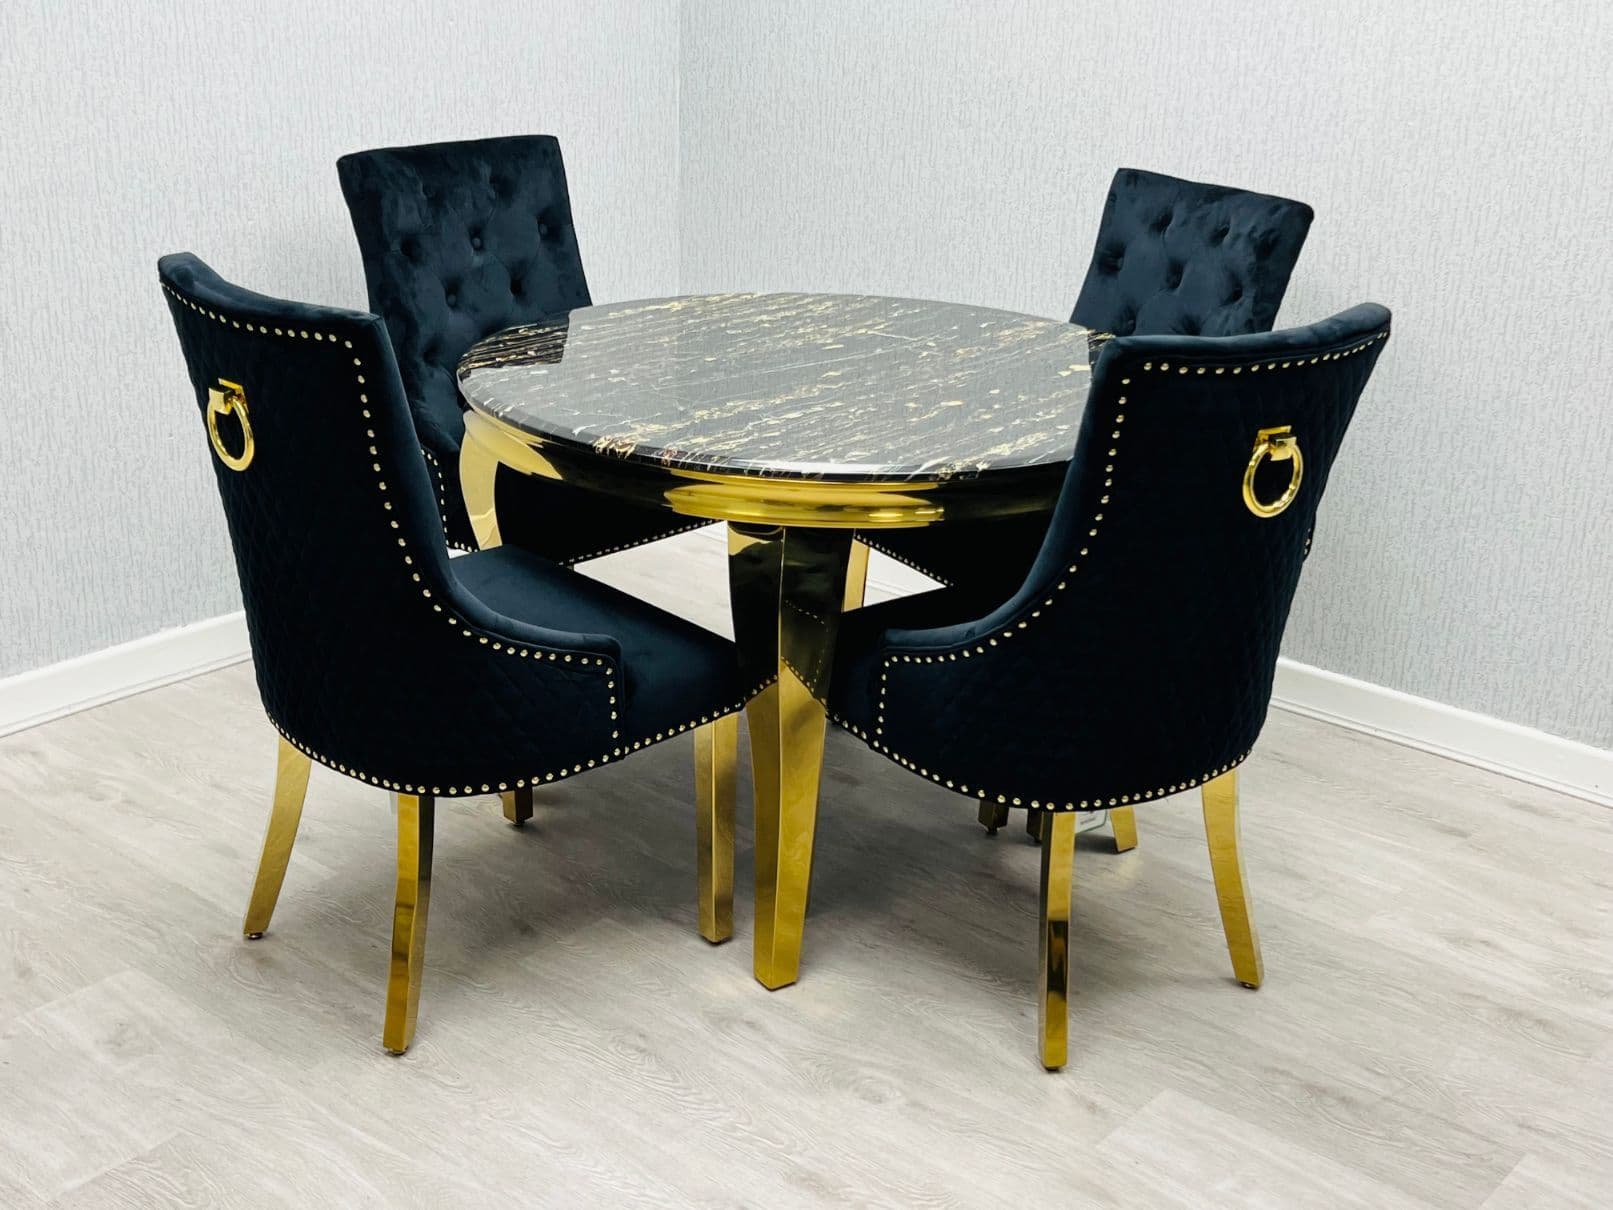 Sofia 110cm Round Black & Gold Frame Marble Table And 4 chair